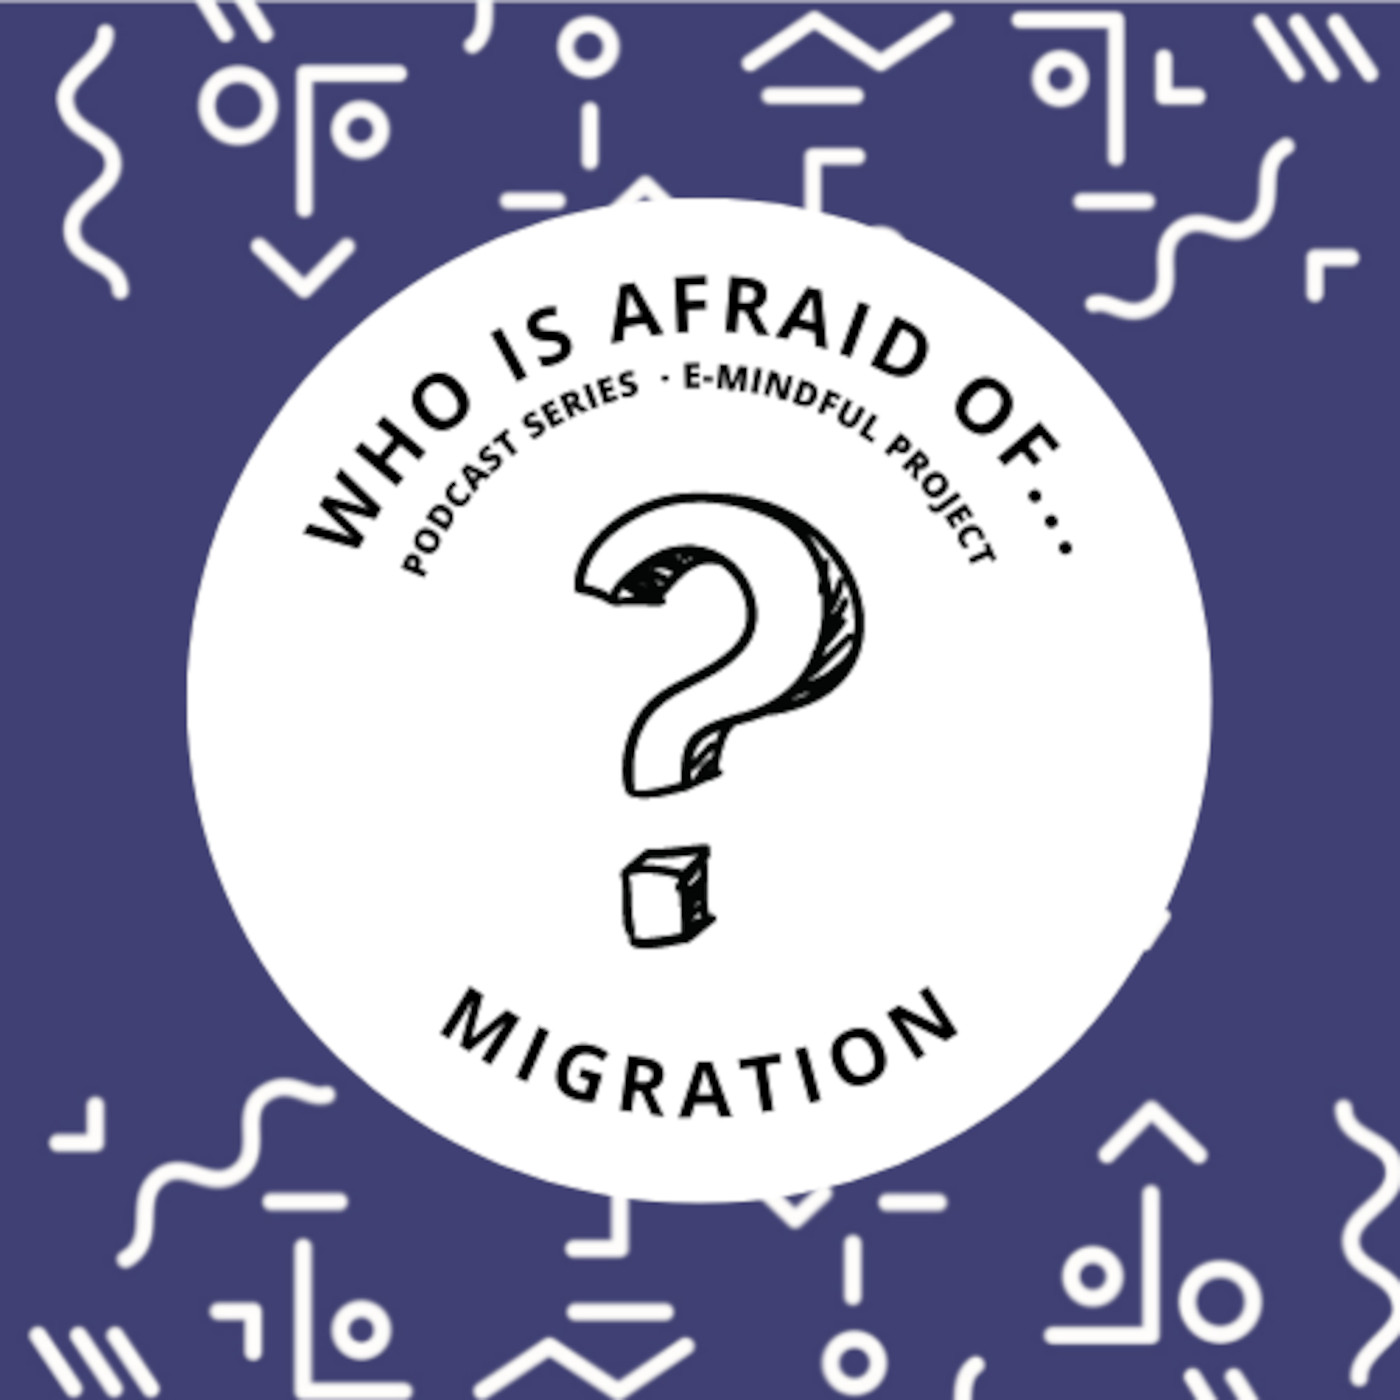 Who is afraid of Migration?